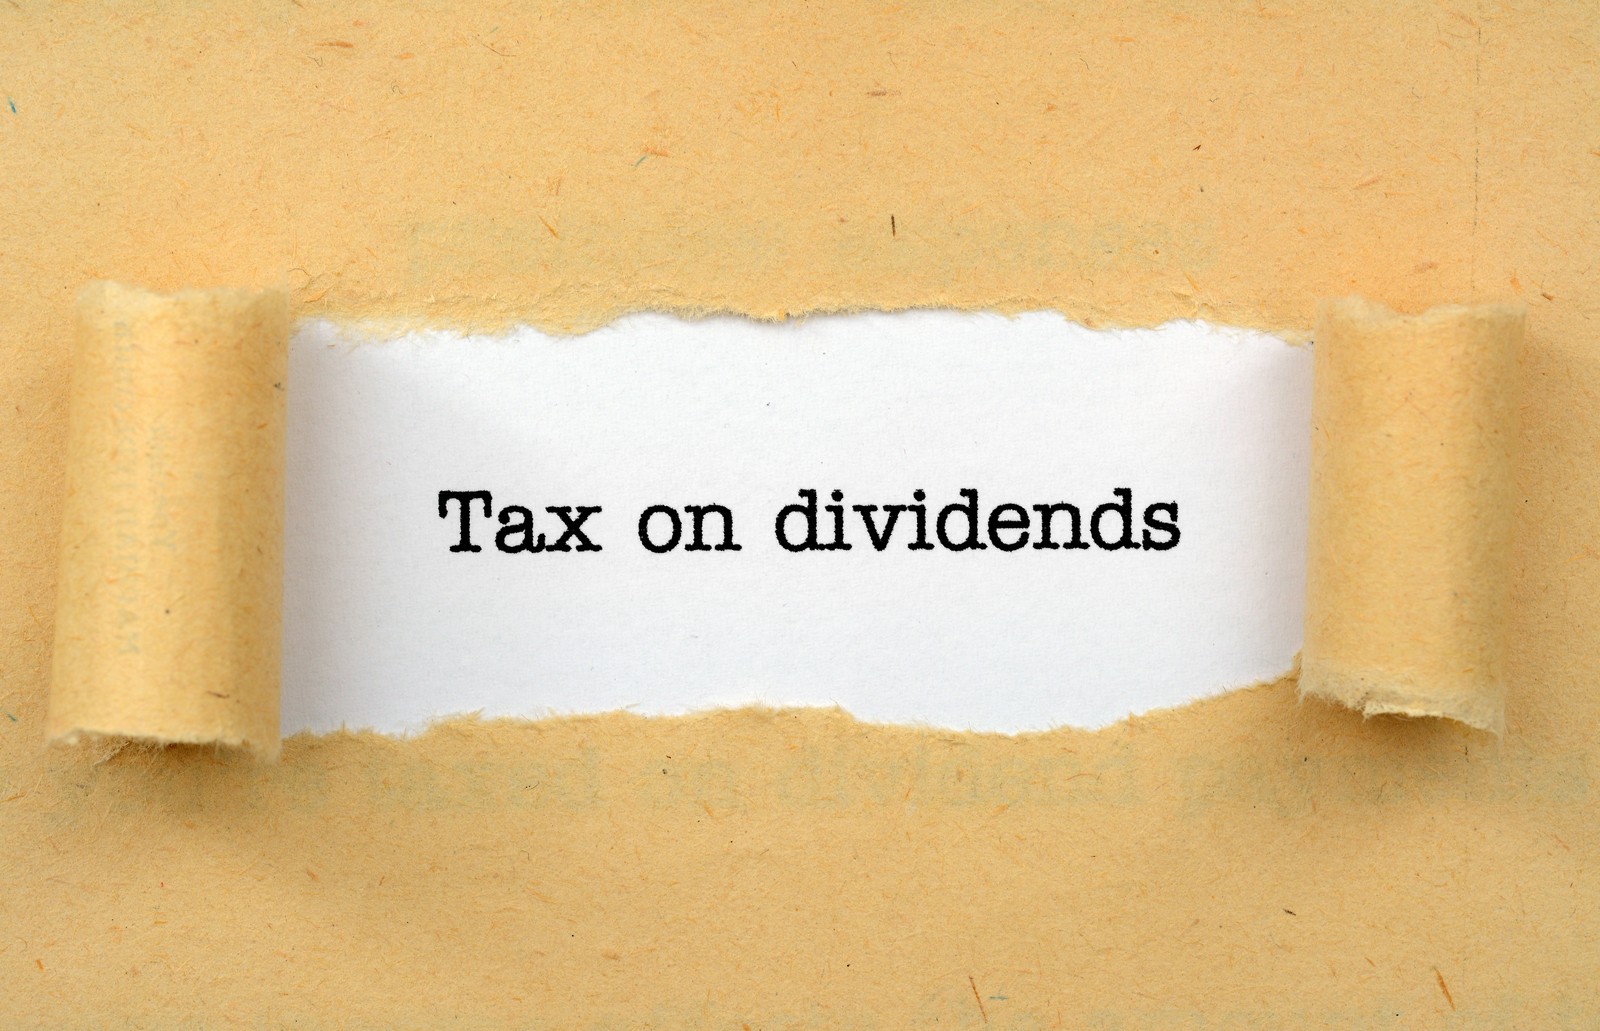 pay tax on dividends